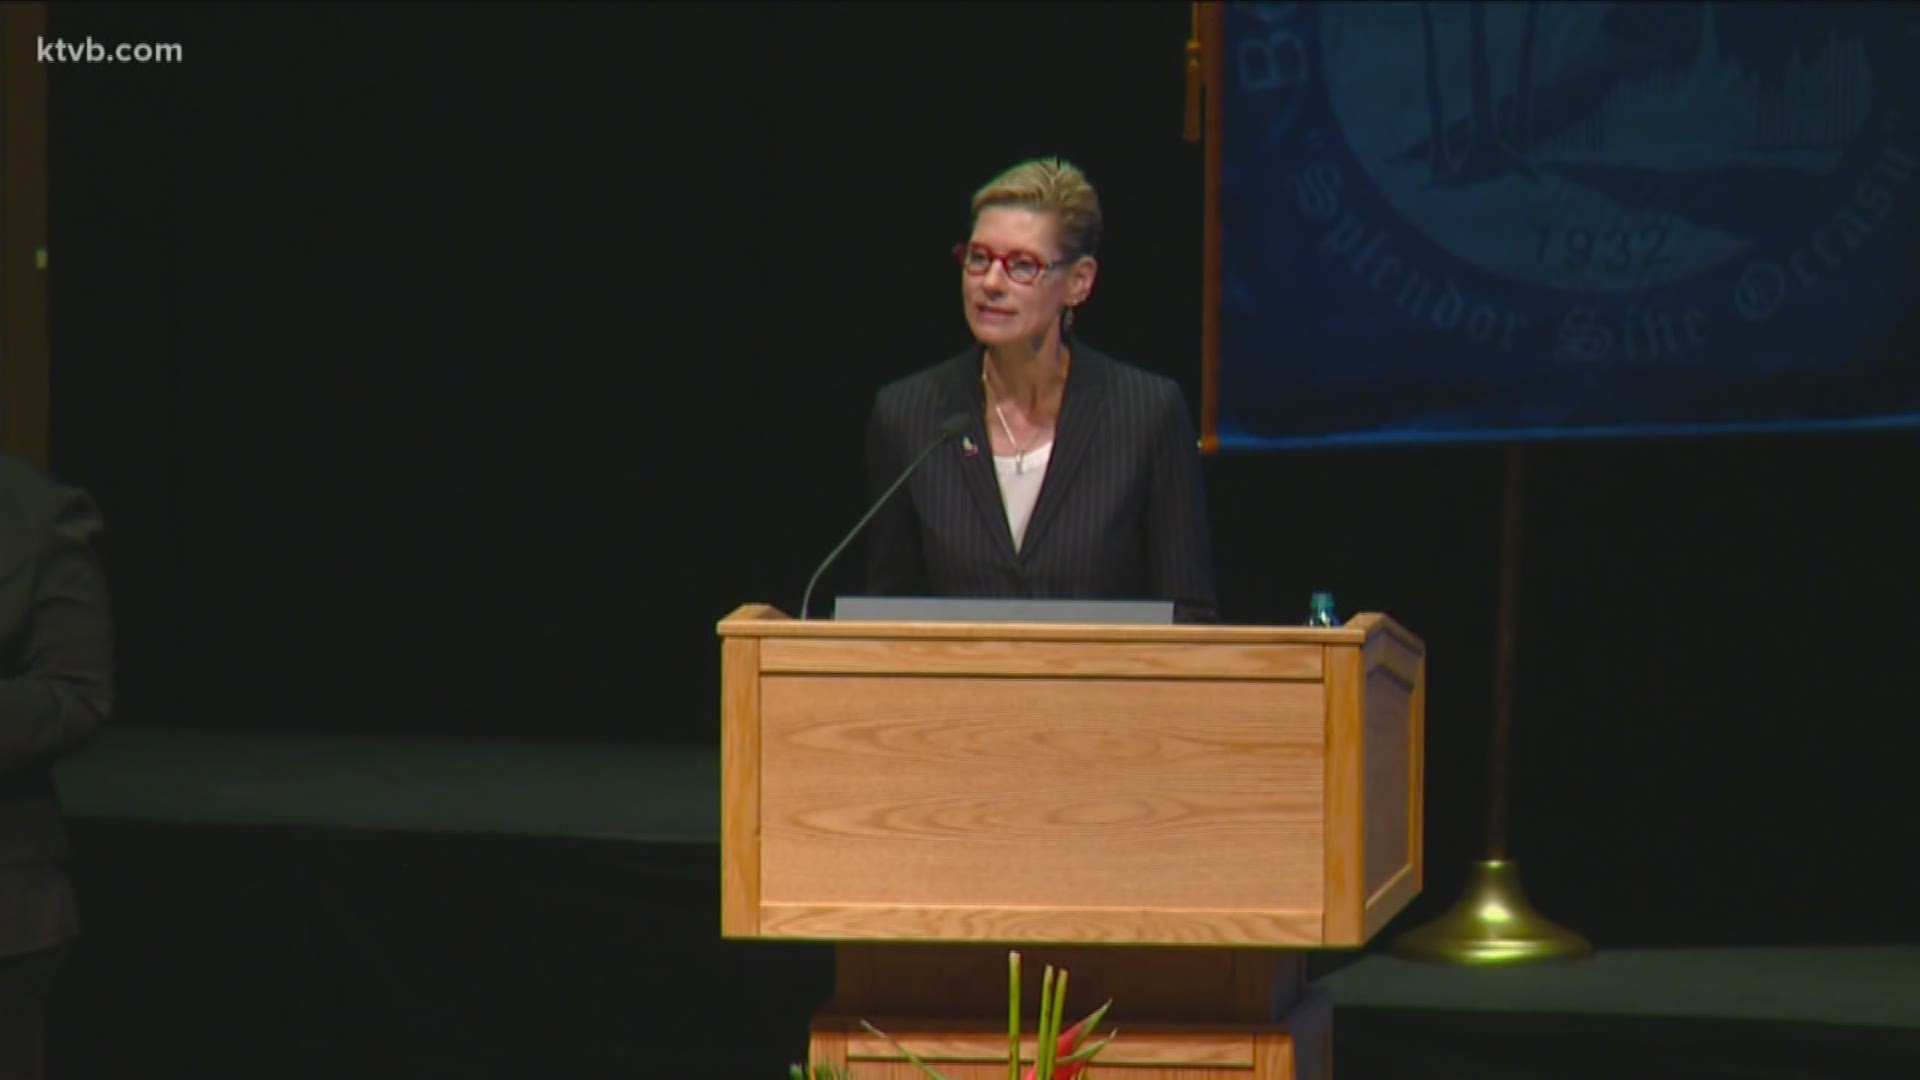 Dr. Marlene Tromp gave her first address before students and faculty Wednesday.